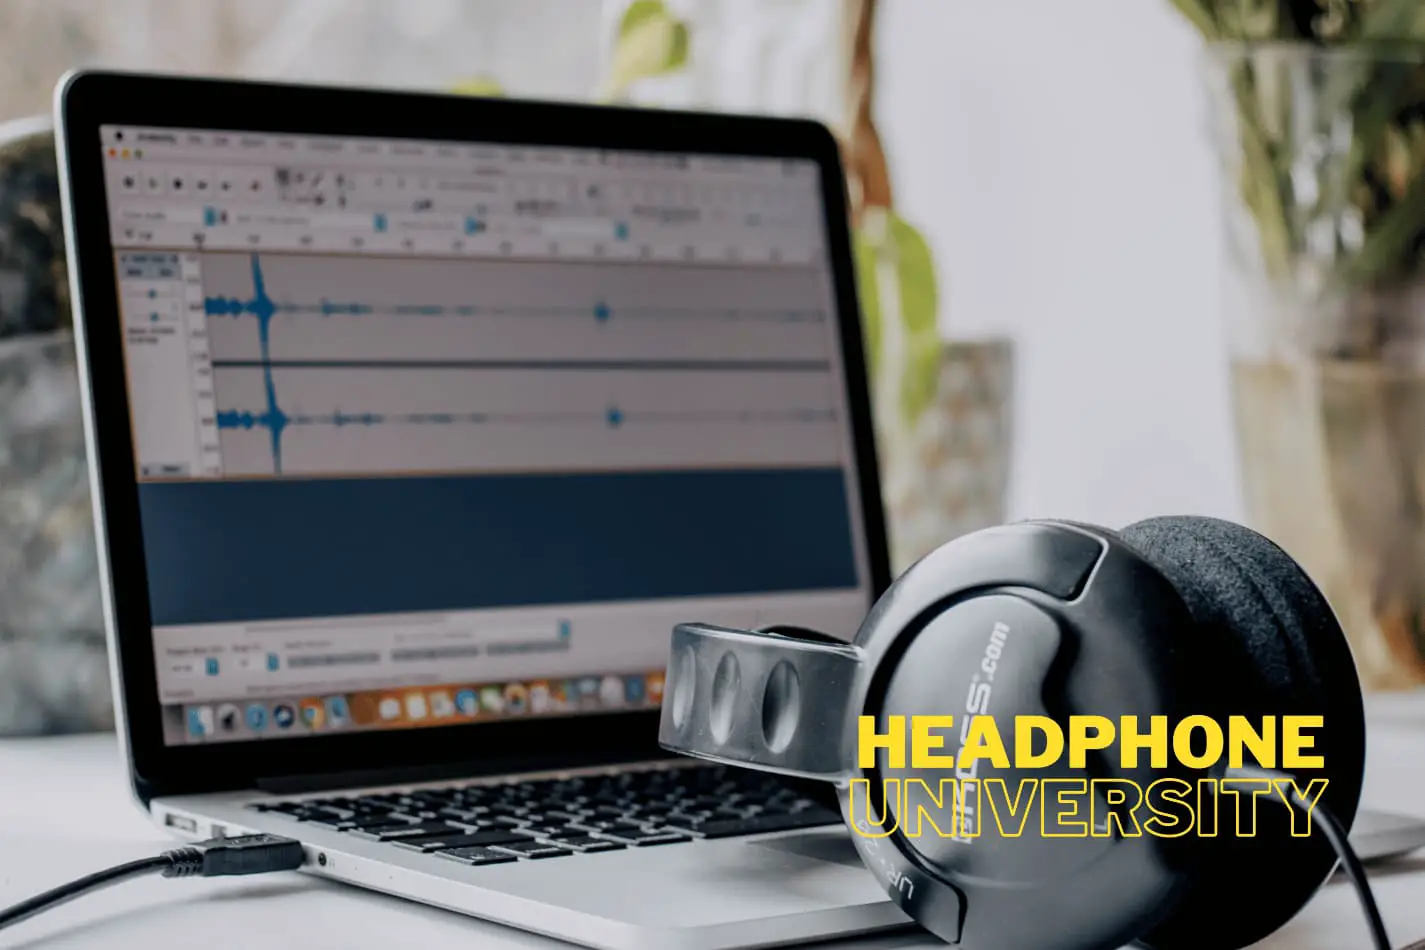 Headphones Sound Off? Here’s How to Check & Fix the Balance